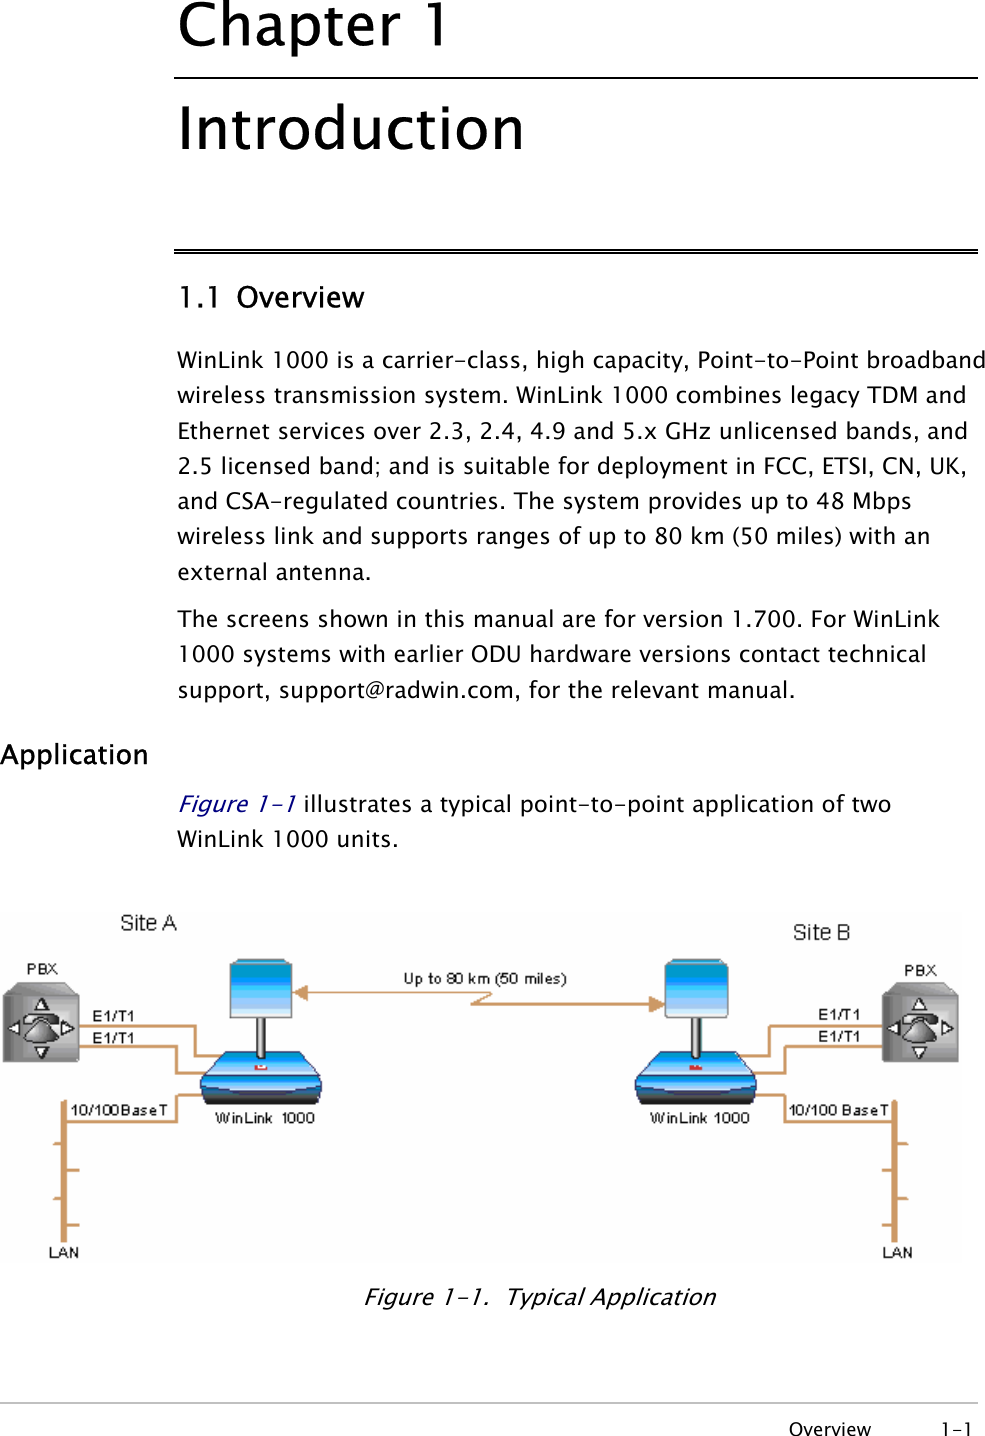 Chapter  1 Introduction 1.1 Overview WinLink 1000 is a carrier-class, high capacity, Point-to-Point broadband wireless transmission system. WinLink 1000 combines legacy TDM and Ethernet services over 2.3, 2.4, 4.9 and 5.x GHz unlicensed bands, and 2.5 licensed band; and is suitable for deployment in FCC, ETSI, CN, UK, and CSA-regulated countries. The system provides up to 48 Mbps wireless link and supports ranges of up to 80 km (50 miles) with an external antenna. The screens shown in this manual are for version 1.700. For WinLink 1000 systems with earlier ODU hardware versions contact technical support, support@radwin.com, for the relevant manual. Application Figure  1-1 illustrates a typical point-to-point application of two WinLink 1000 units.    Figure  1-1.  Typical Application  Overview 1-1 